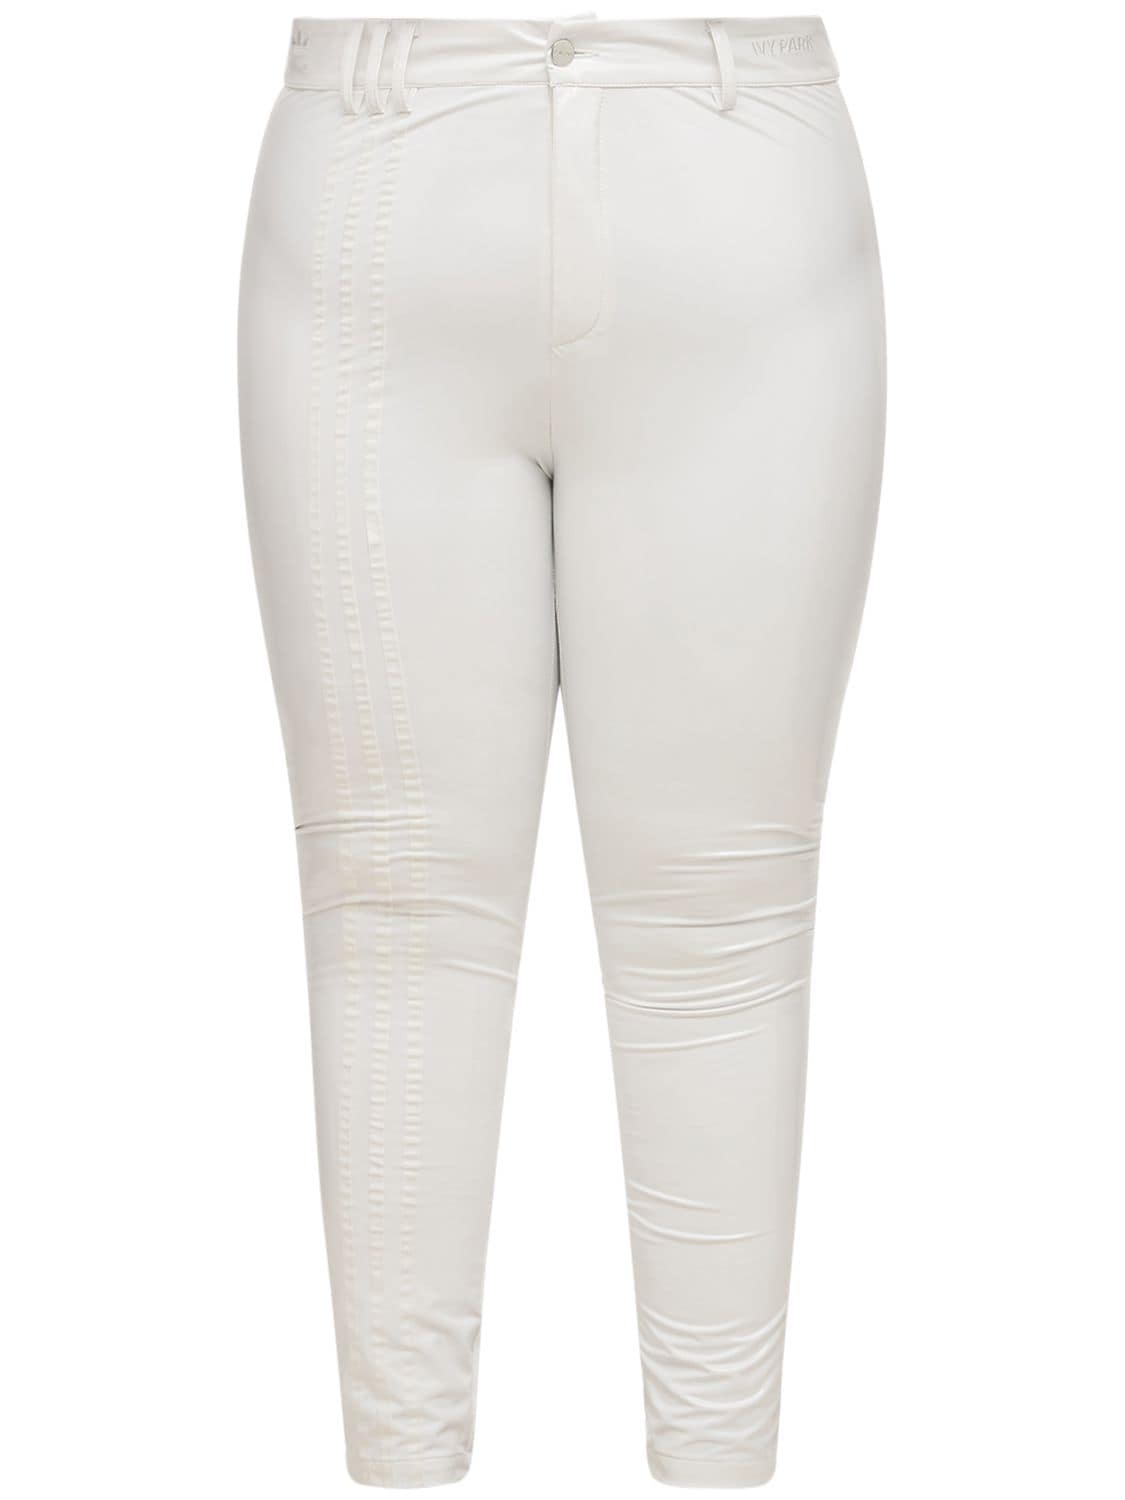 Adidas X Ivy Park 3-stripes High Waist Latex Trousers In White